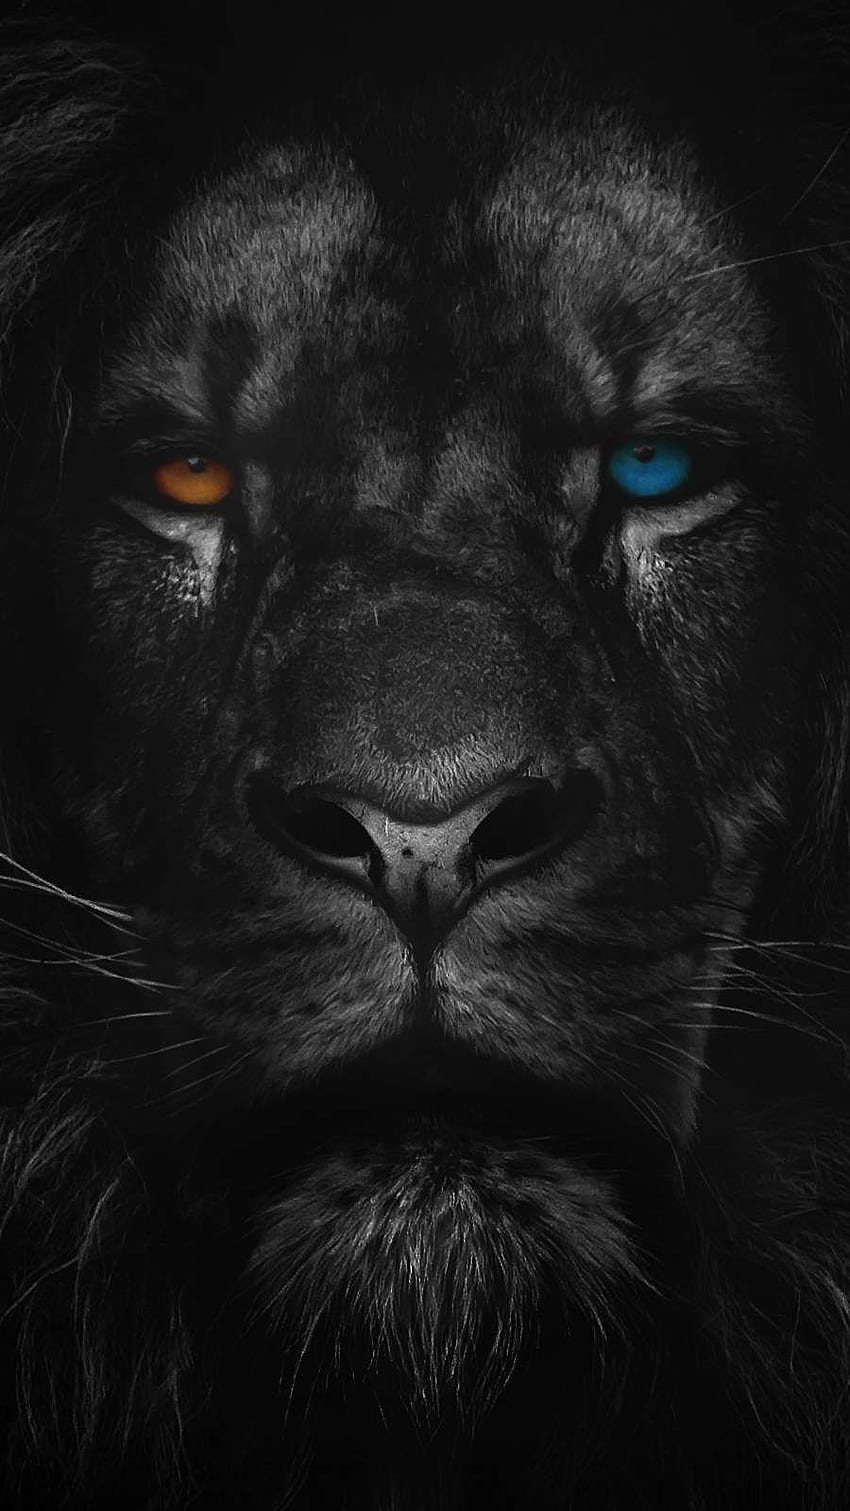 iPhone for iPhone 8, iPhone 8 Plus, iPhone 6s, iPhone 6s Plus, iPhone X and iPod Touch Hi. Lion live , Lion iphone, Animal , White Lion iPhone HD phone wallpaper